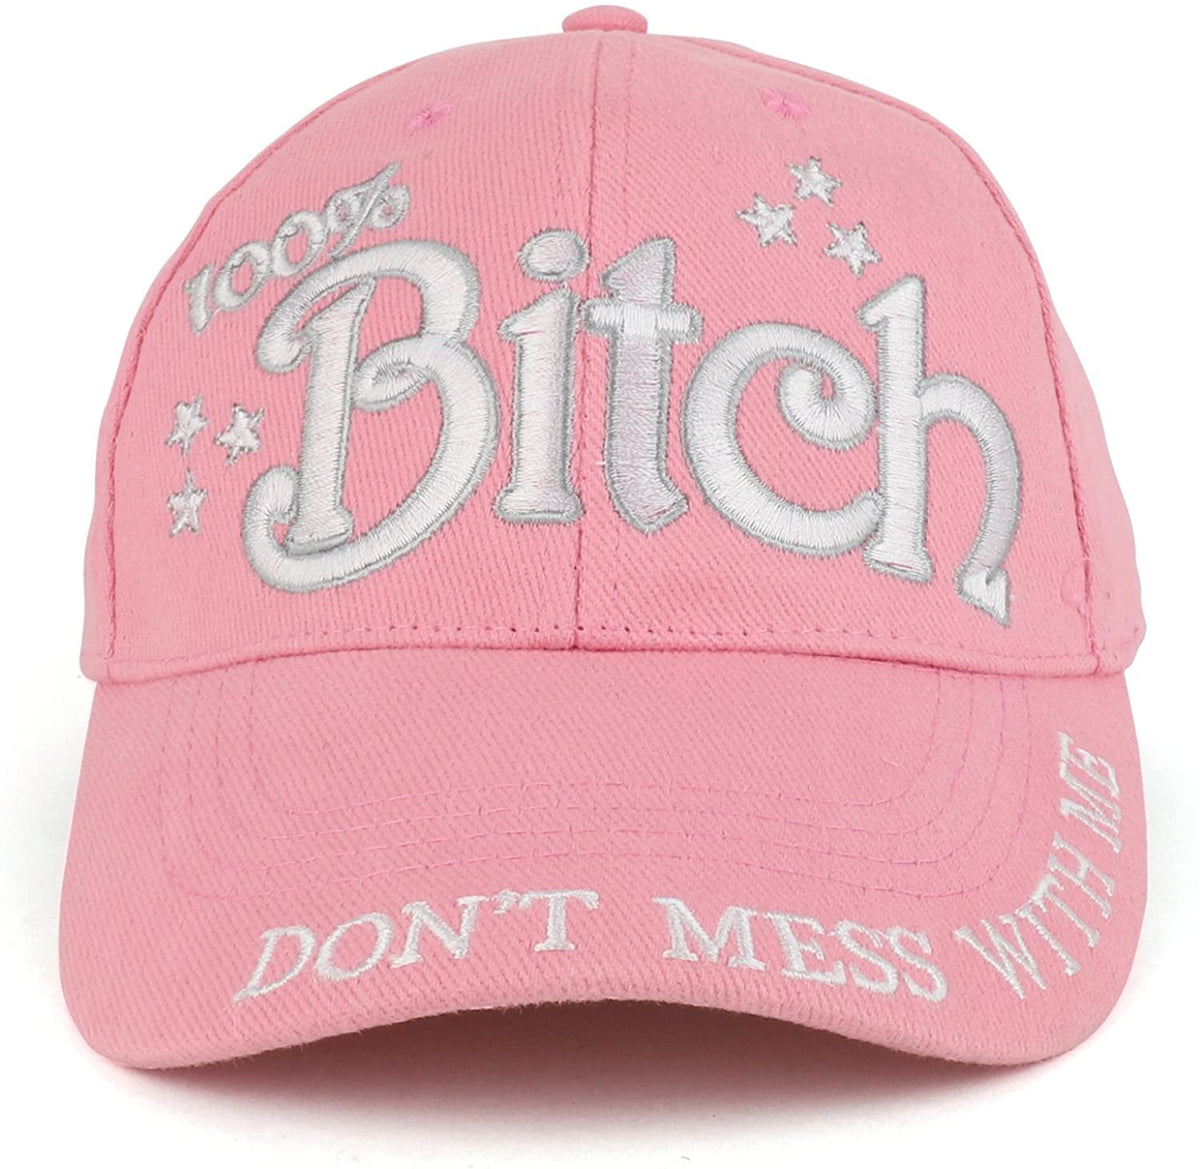 Armycrew 100% Bitch Don't Mess with Me Embroidered Structured Baseball Cap